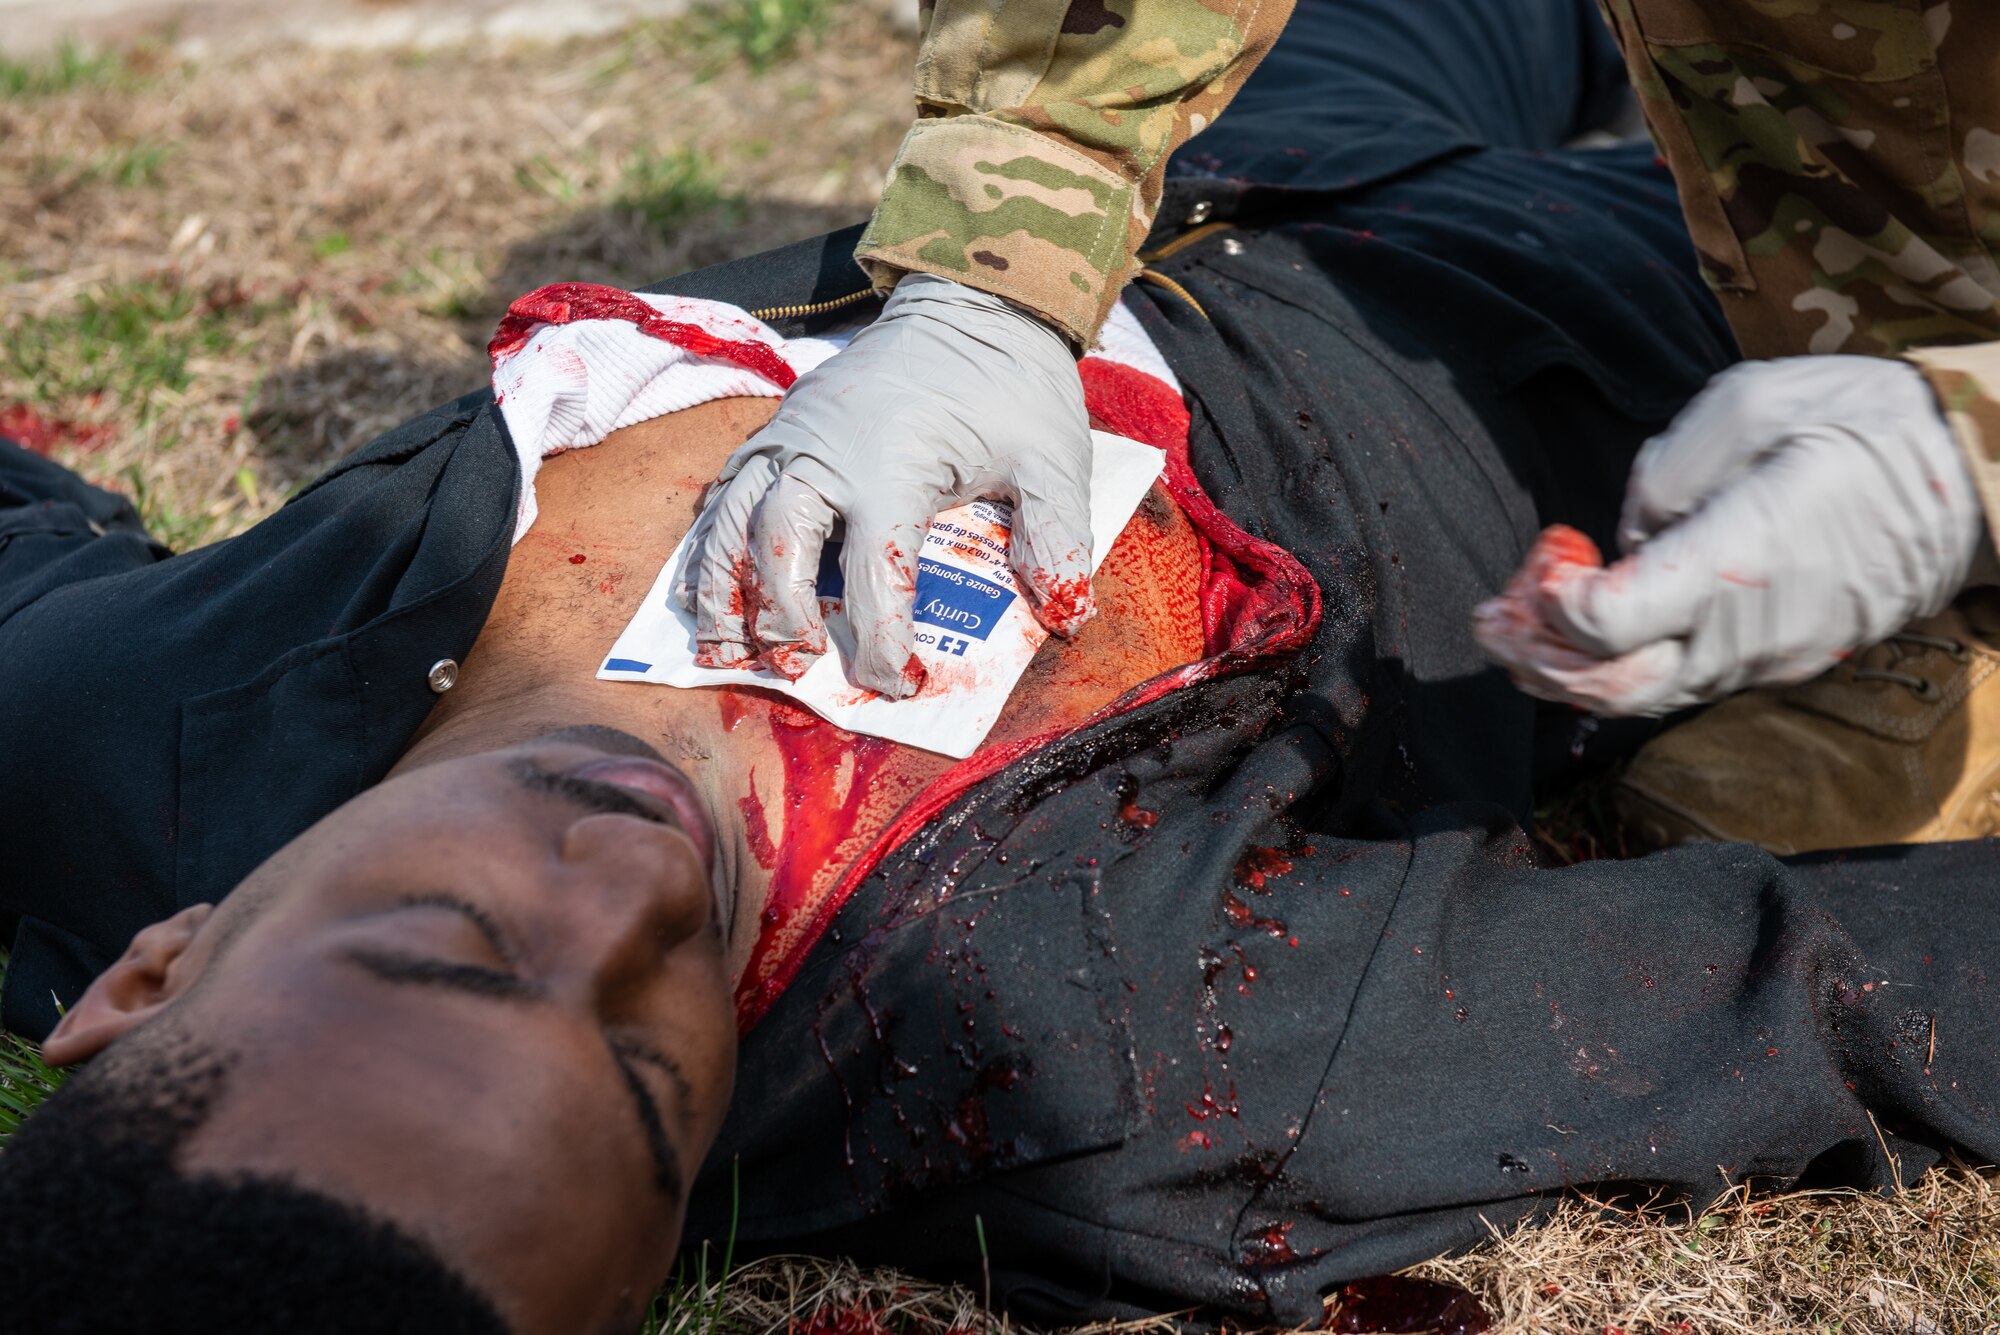 Staff Sgt. Adam Carroll, 51st Civil Engineer Squadron fire protection Airman, applies a quick-clotting bandage to a simulated gunshot wound on Tech. Sgt. Gerard Thomas, 51st Civil Engineer Squadron fire department station chief, during a national registry emergency medical technician training scenario at Osan Air Base, Republic of Korea, April 5, 2021.